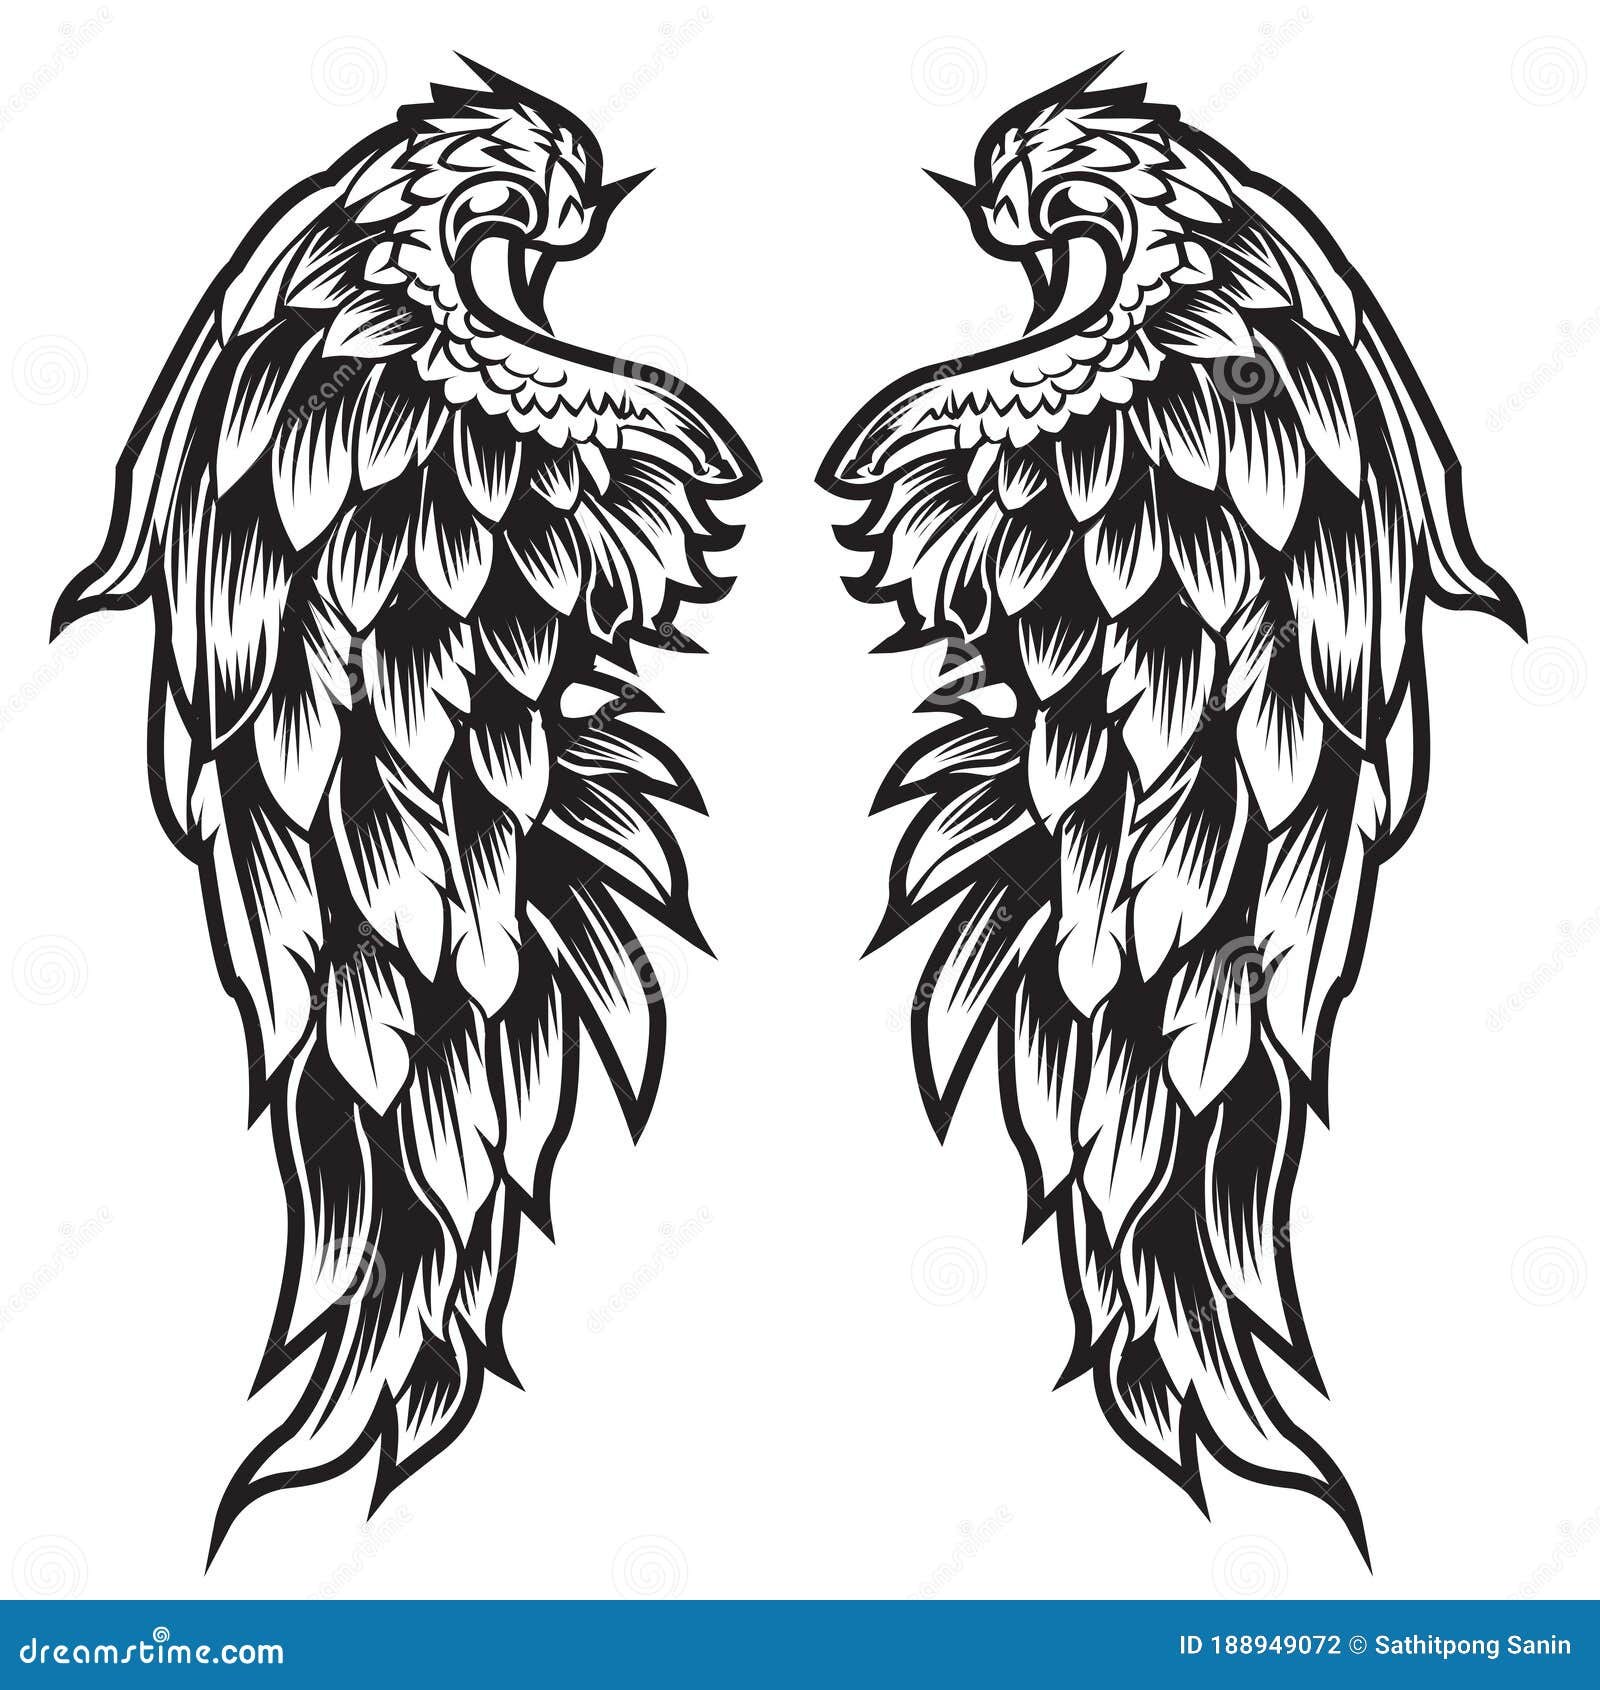 voorkoms Angel Wings Eagle Wings Bird Black And White Design Phoenix Wings   Tribal Effect Eye Wings tattoo menwomen Waterproof temporary tattoo for  all boys and girls pack of 4  Price